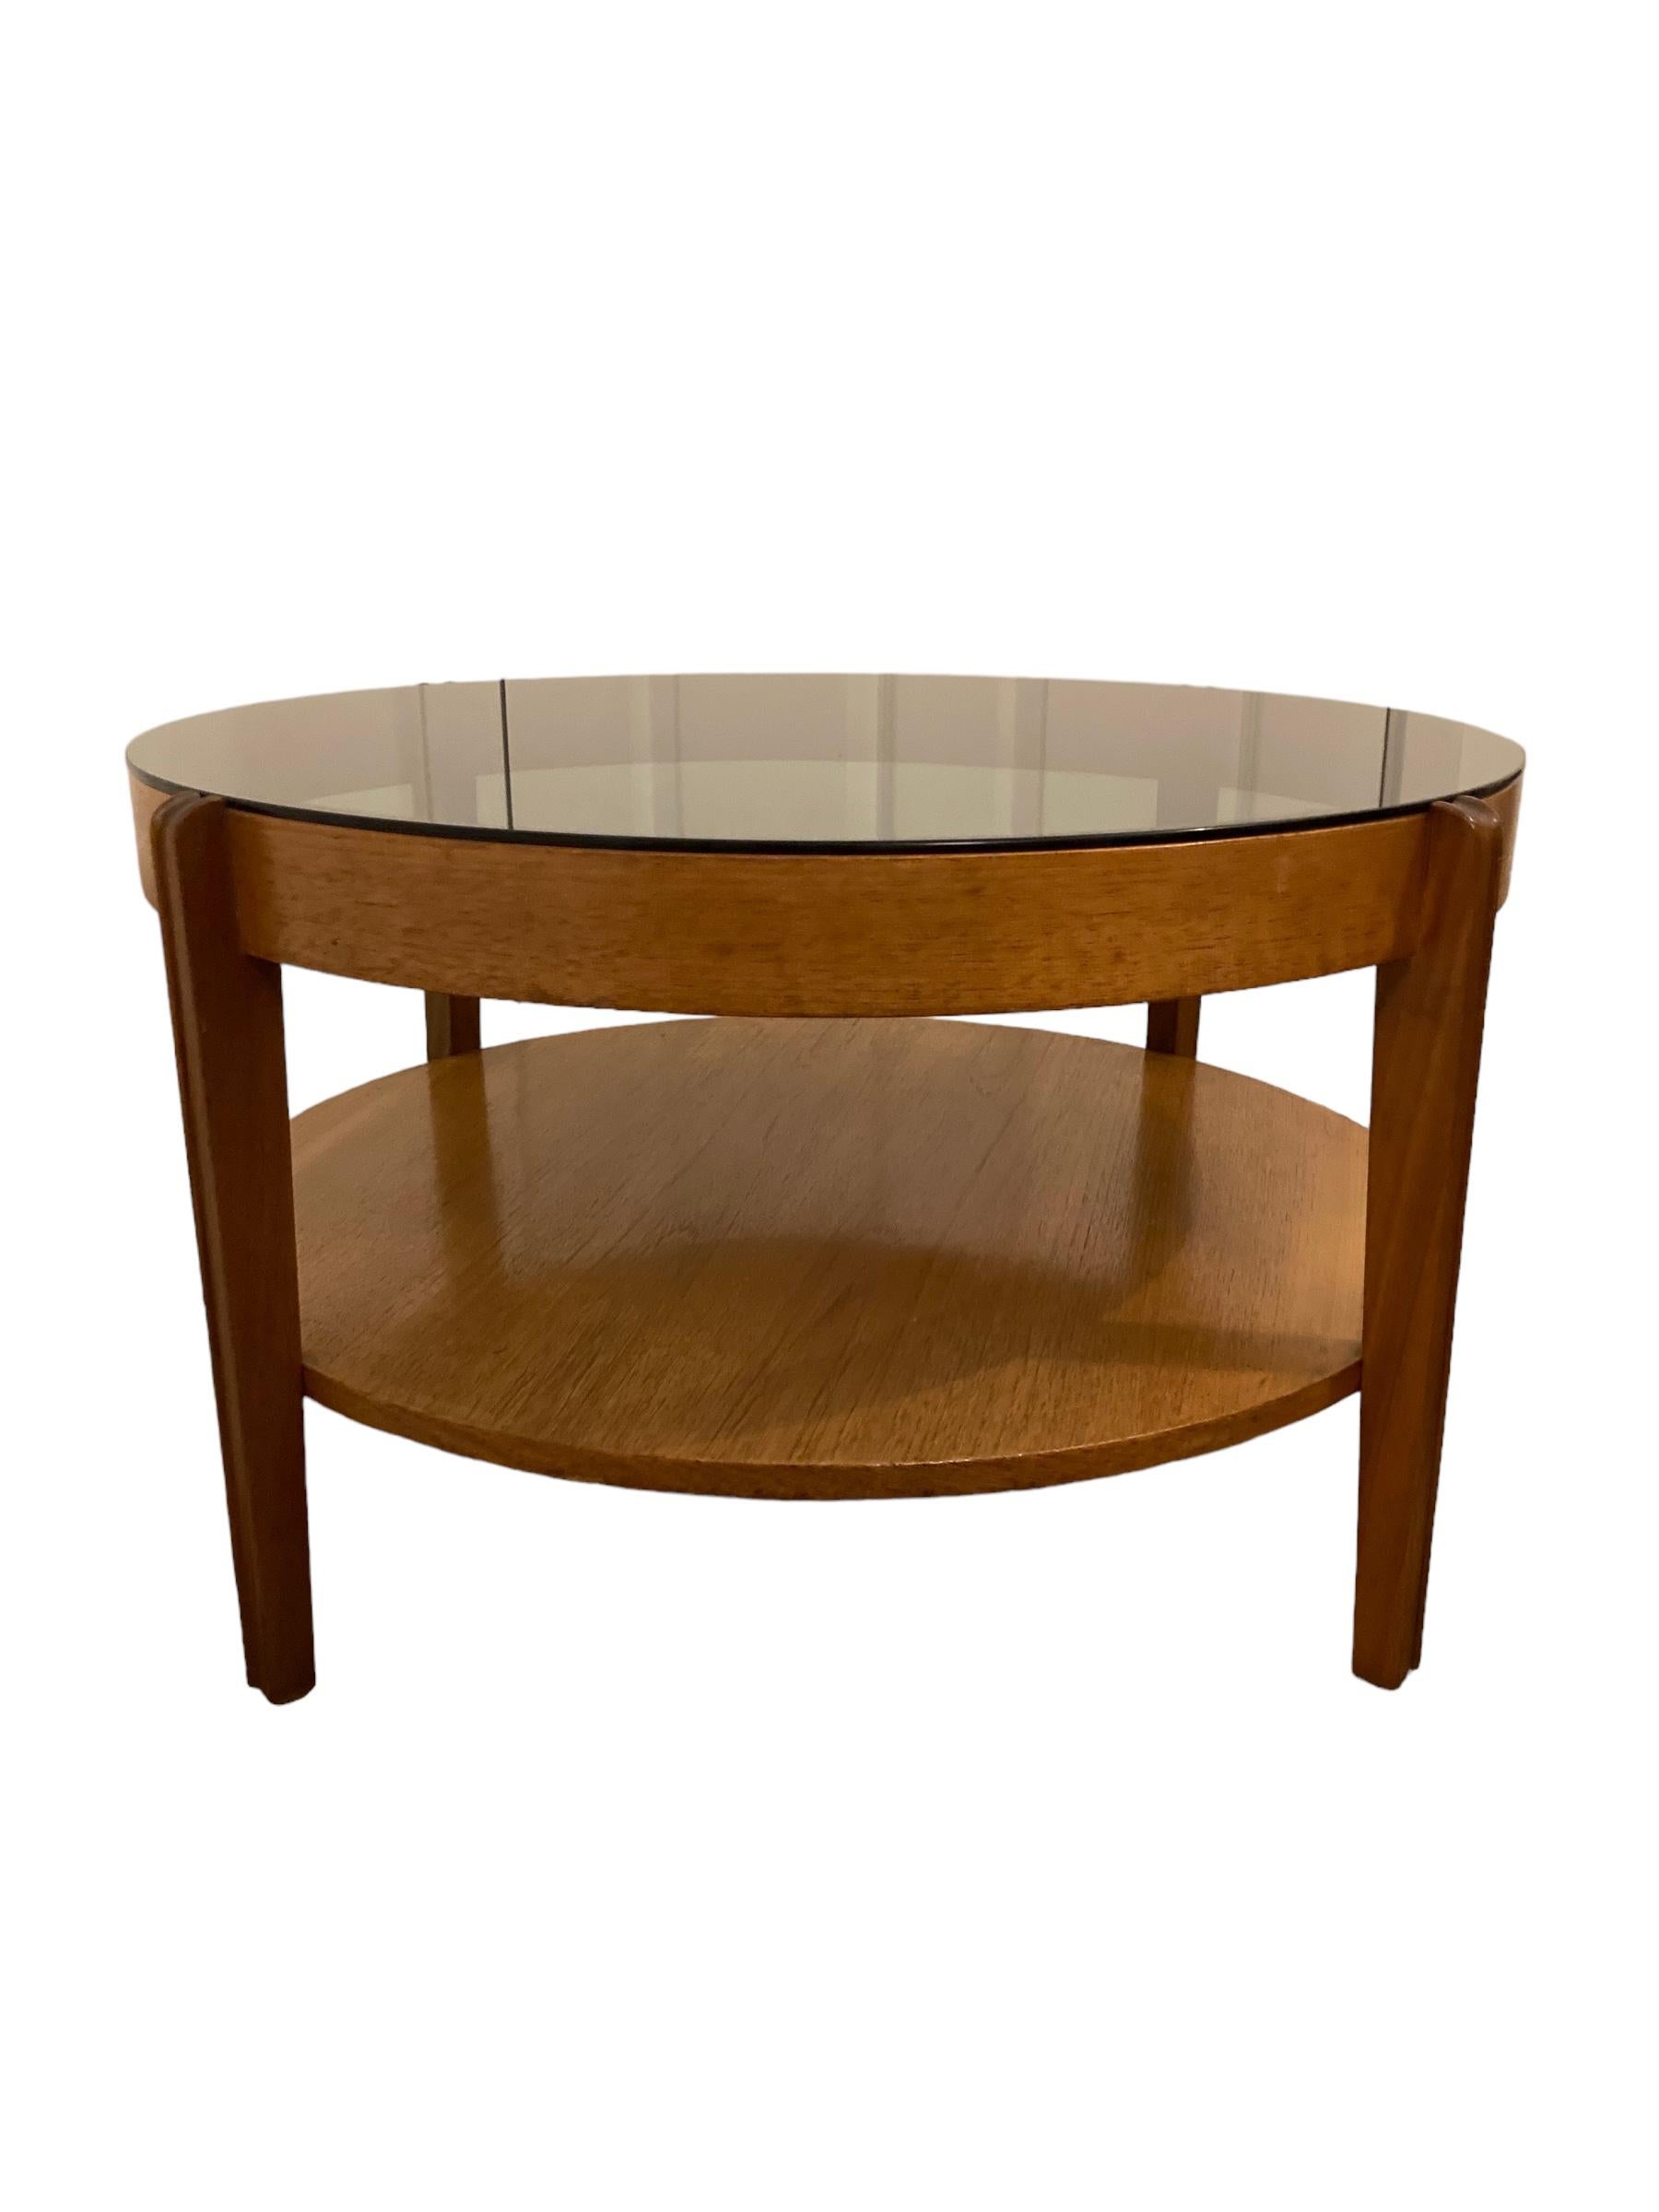 Mid Century Modern round Teak Coffee Table, smoked glass by Remploy of England. Classic 1960's design, stylish tapered legs with bottom shelf. Highly original.
H: 47 cm
Diameter/Width : 77 cm